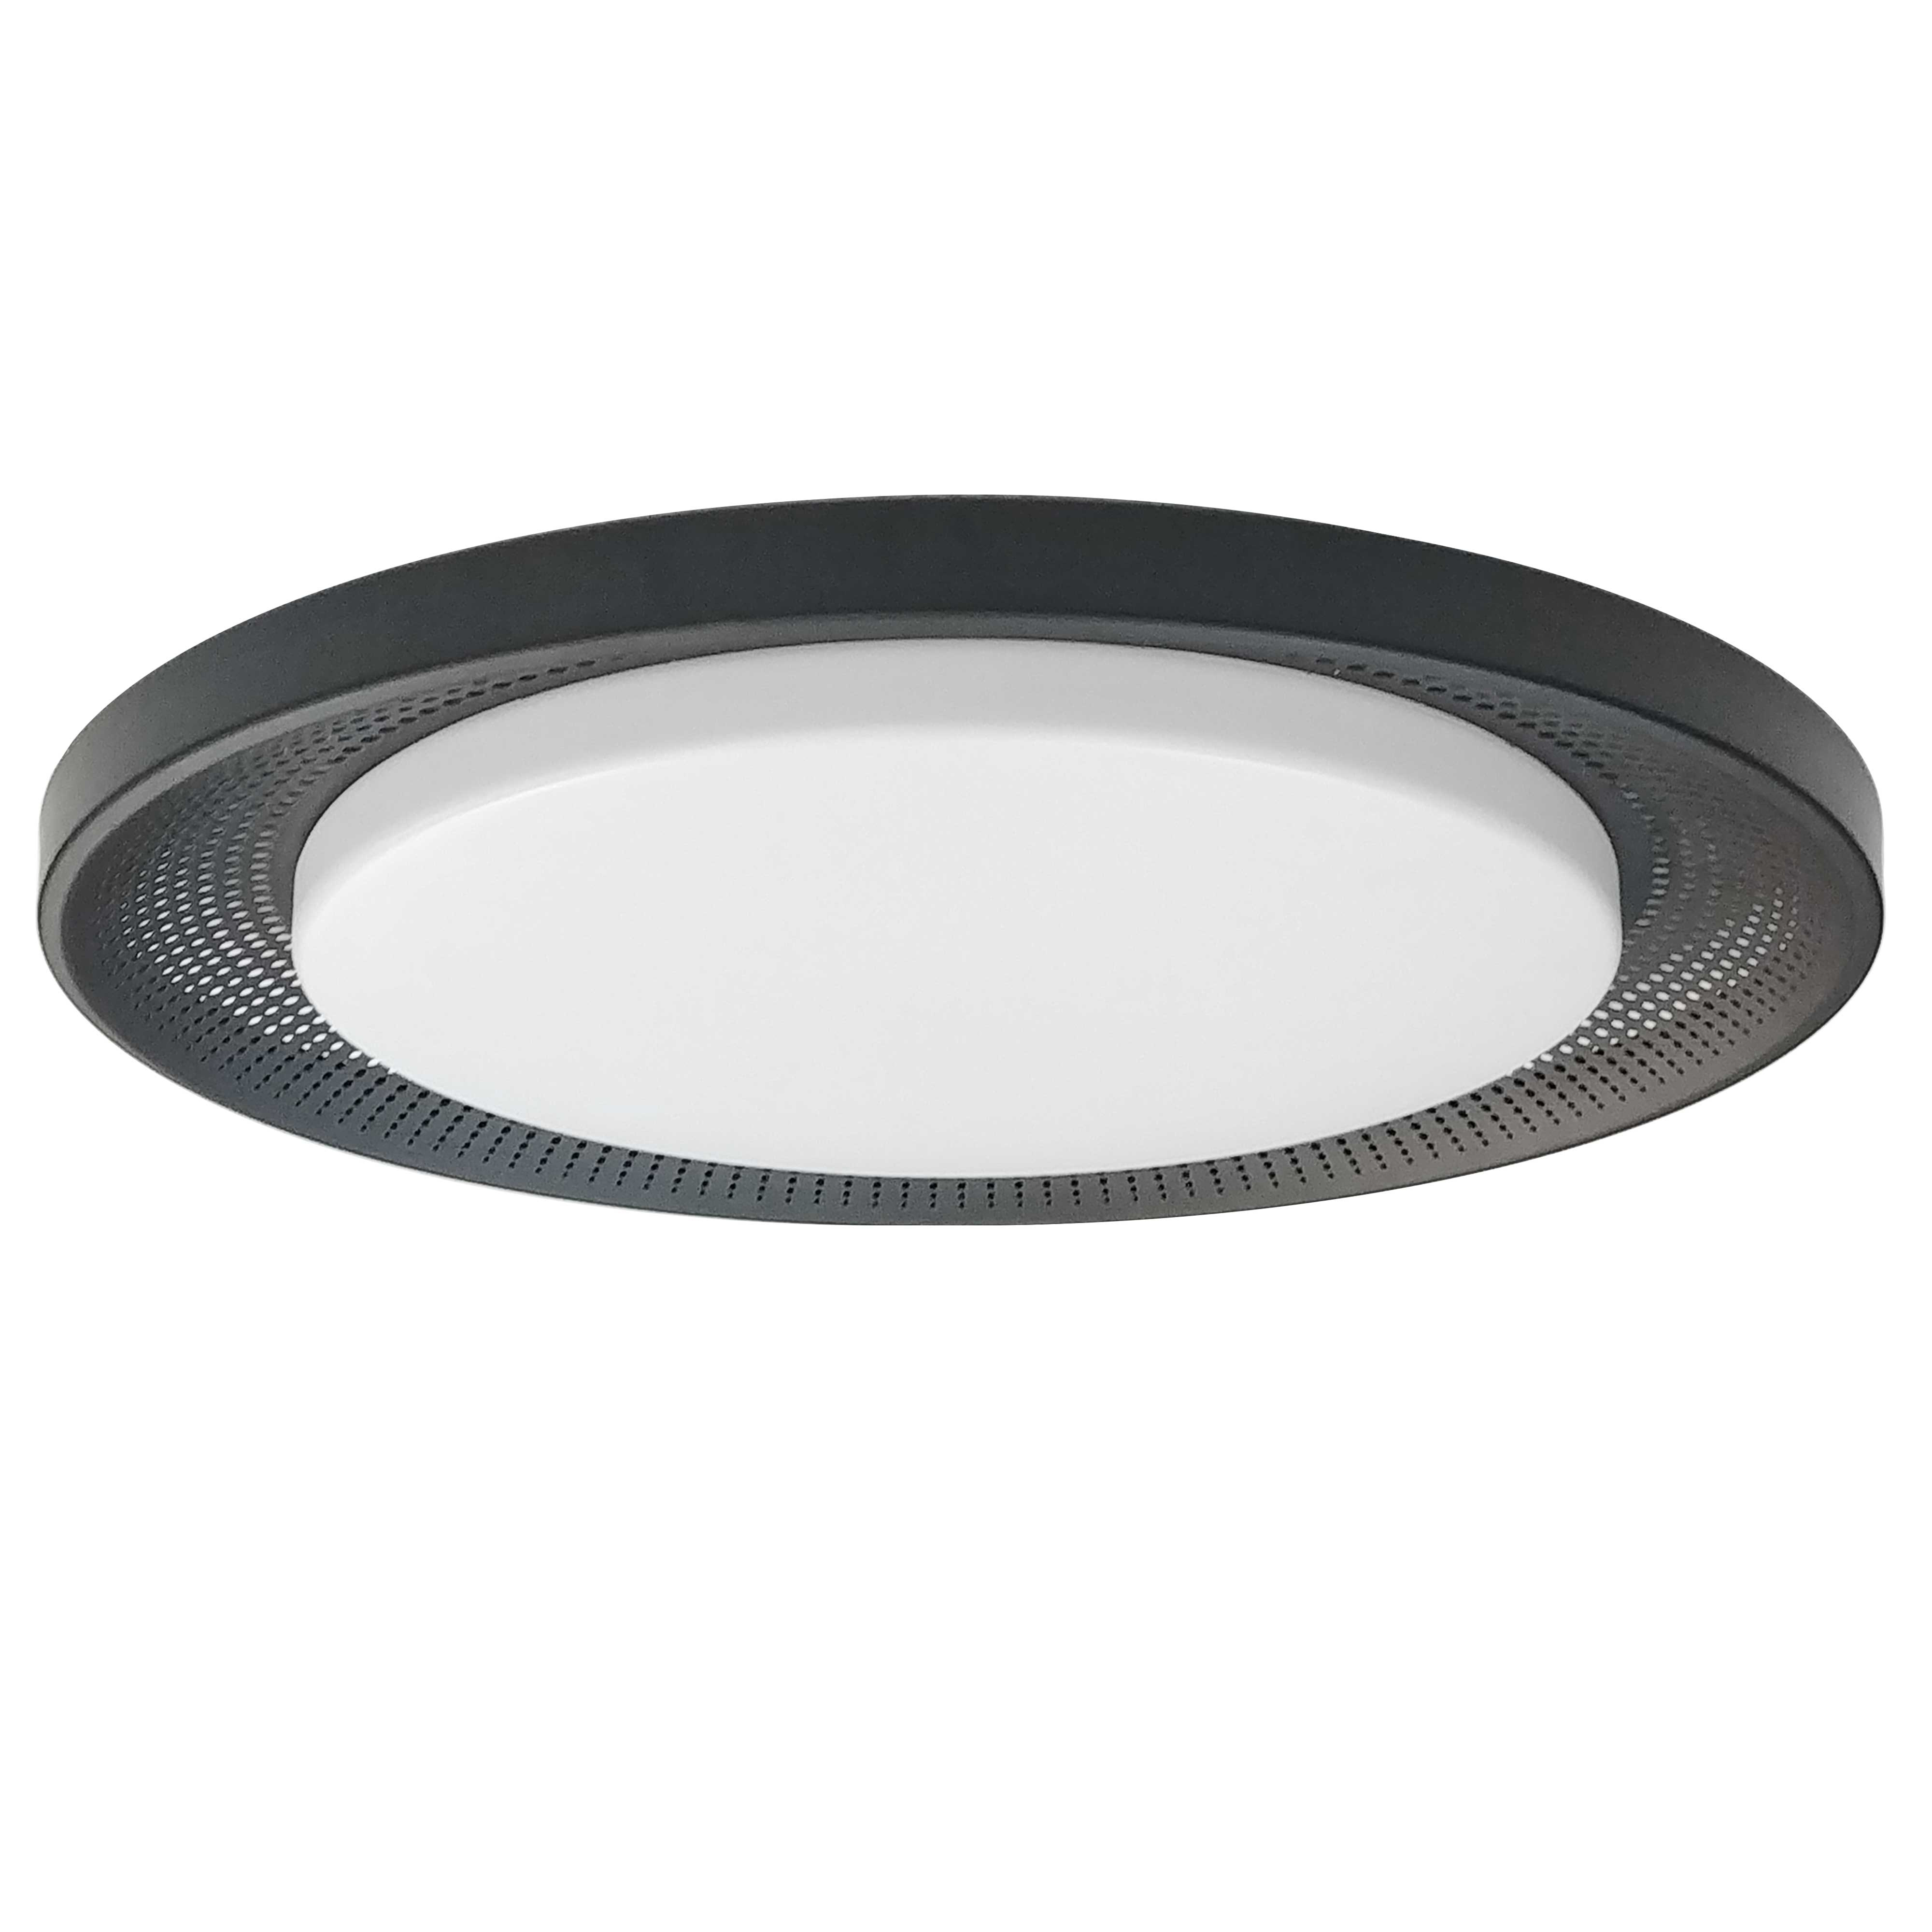 The Boulier family of lighting combines the smooth curve of the LED with textural appeal. The design features an integrated LED light. LED fixtures produce light at up to 90 percent better efficiency than incandescent lighting. The prominent metal frame in your choice of finish surrounds a round LED, with a perforated surface that overlaps an acrylic diffuser. The result is warm and efficient lighting with a slim profile and stylish look. It's an ingenious design with detail that draws the eye towards the furnishings that surround it in bedrooms, hallways, and many other areas of the home.